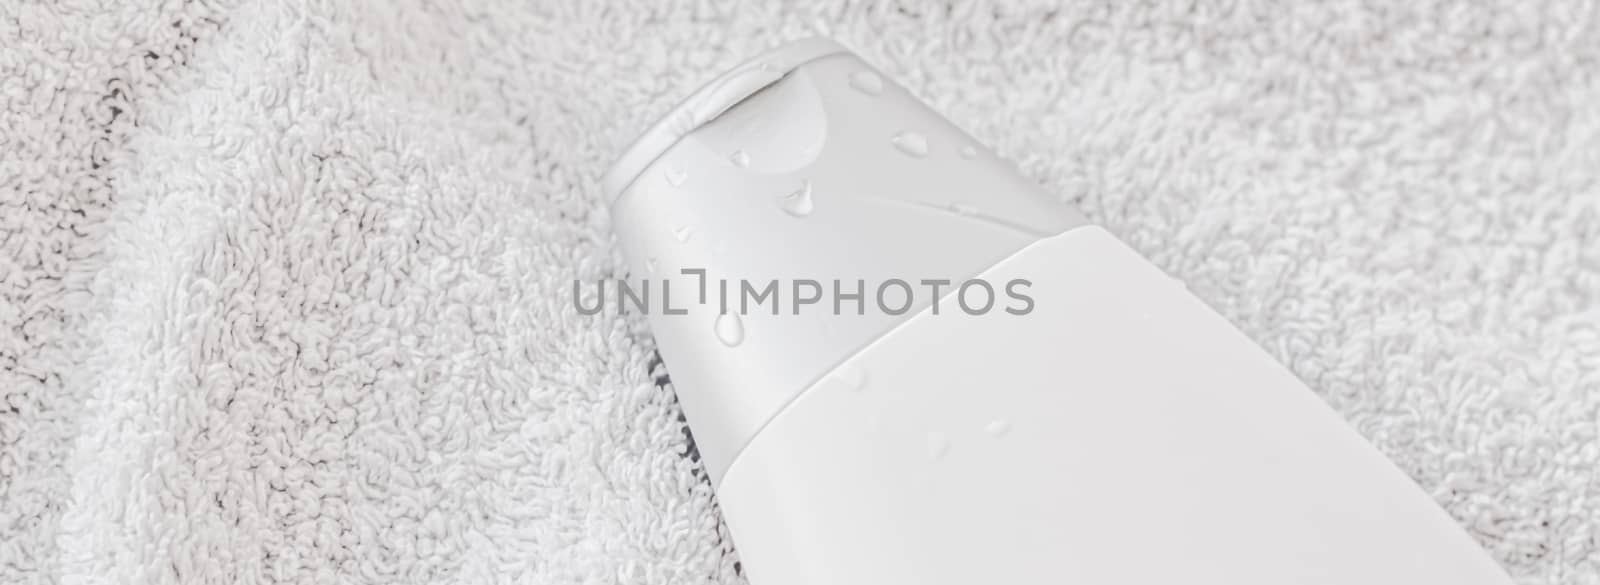 Blank label cosmetic container bottle as product mockup on white towel background, hygiene and healthcare